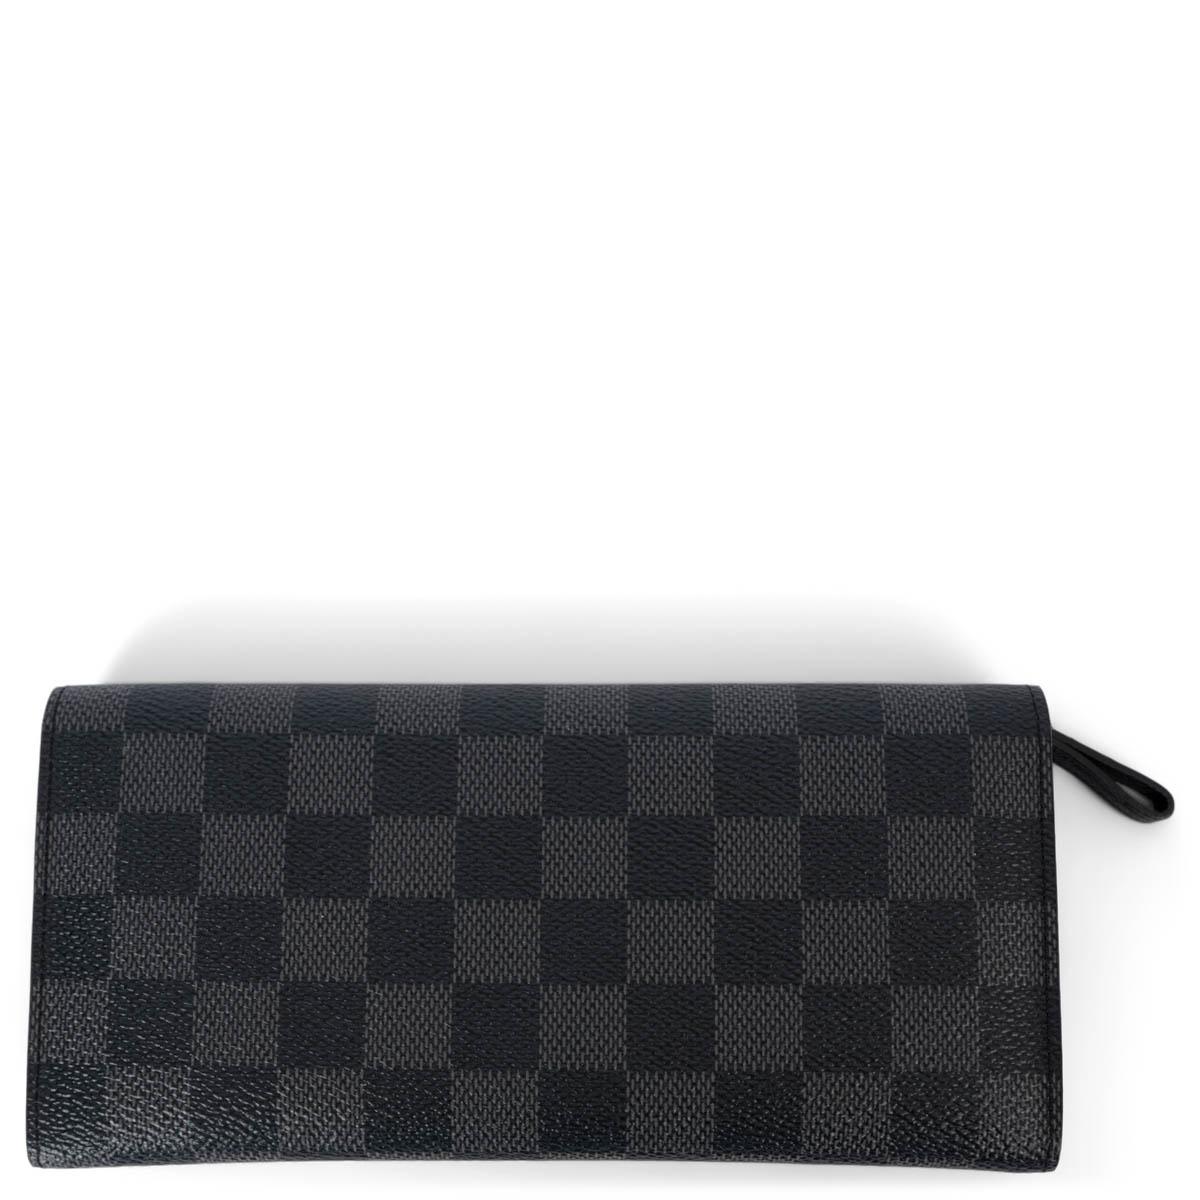 100% authentic Louis Vuitton Ron Long Modular wallet in Graphite Damier canvas with silver-tone hardware. When you open the flap, there are 3 types of detachable cases: card holder, coin purse, ID case, each of which can be used alone. Depending on